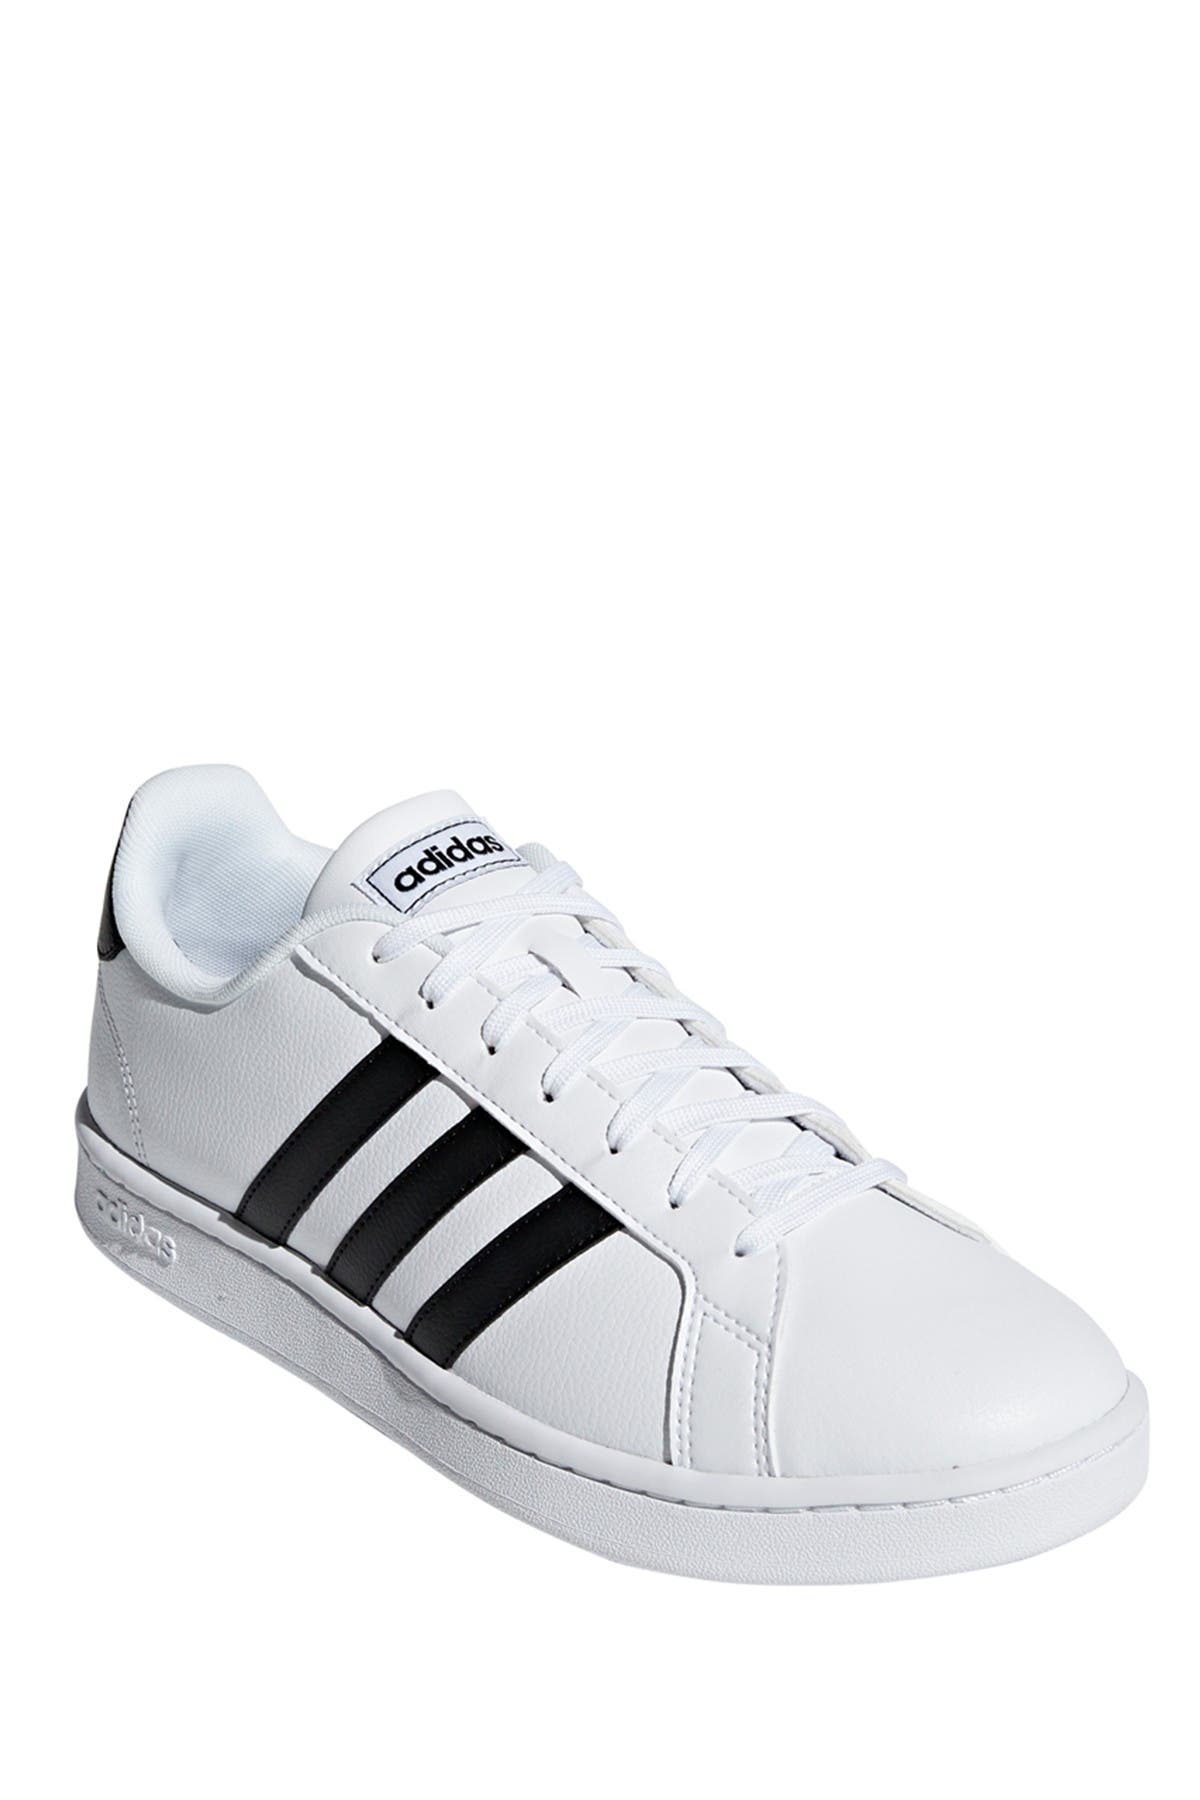 adidas men's leather sneakers